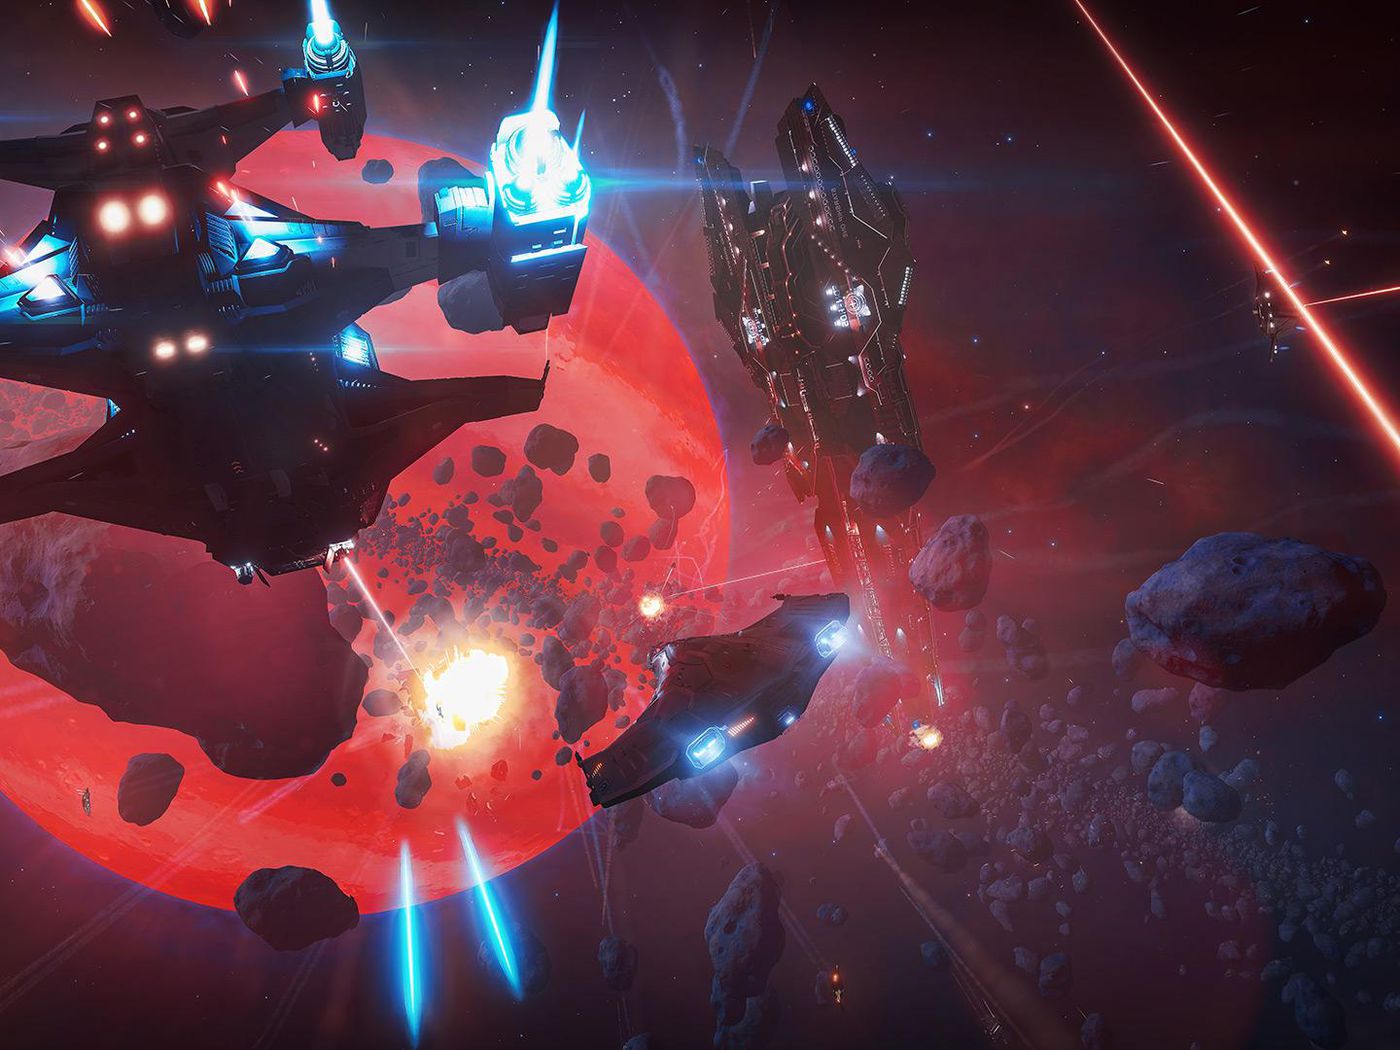 Elite's Distant Worlds 2 proves the game is unbalanced, and that's OK